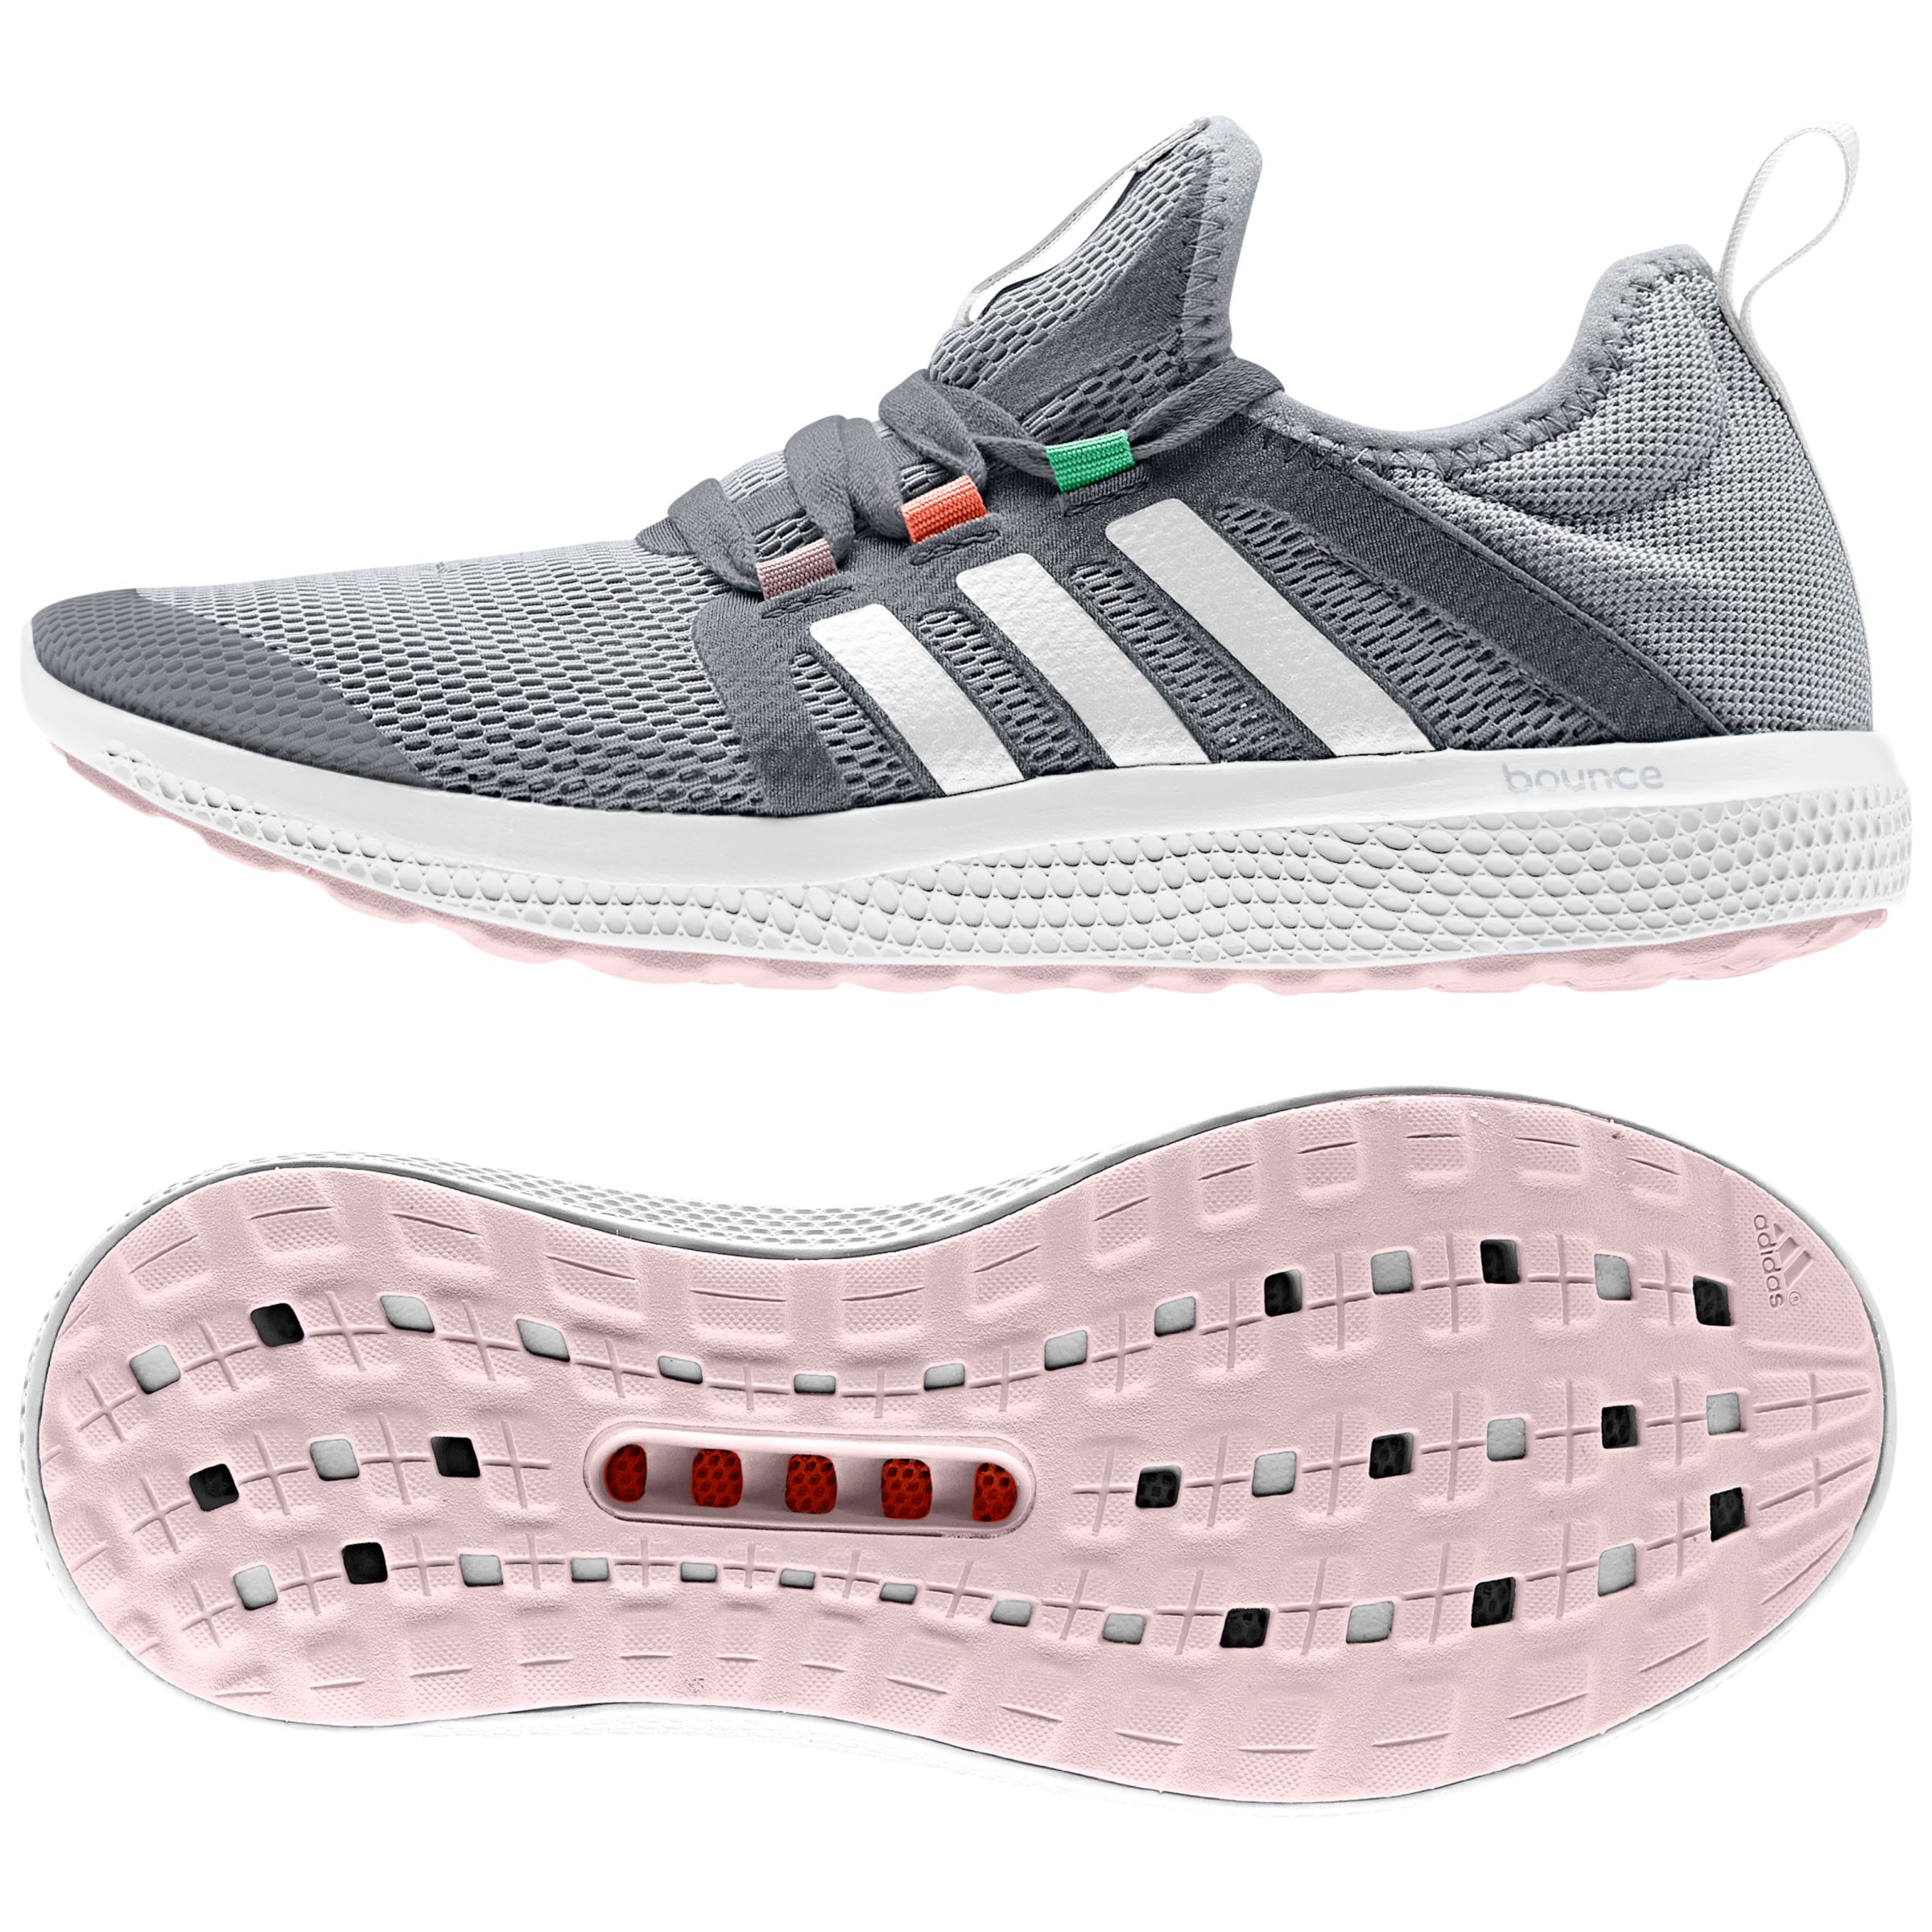 adidas climacool women's running shoes